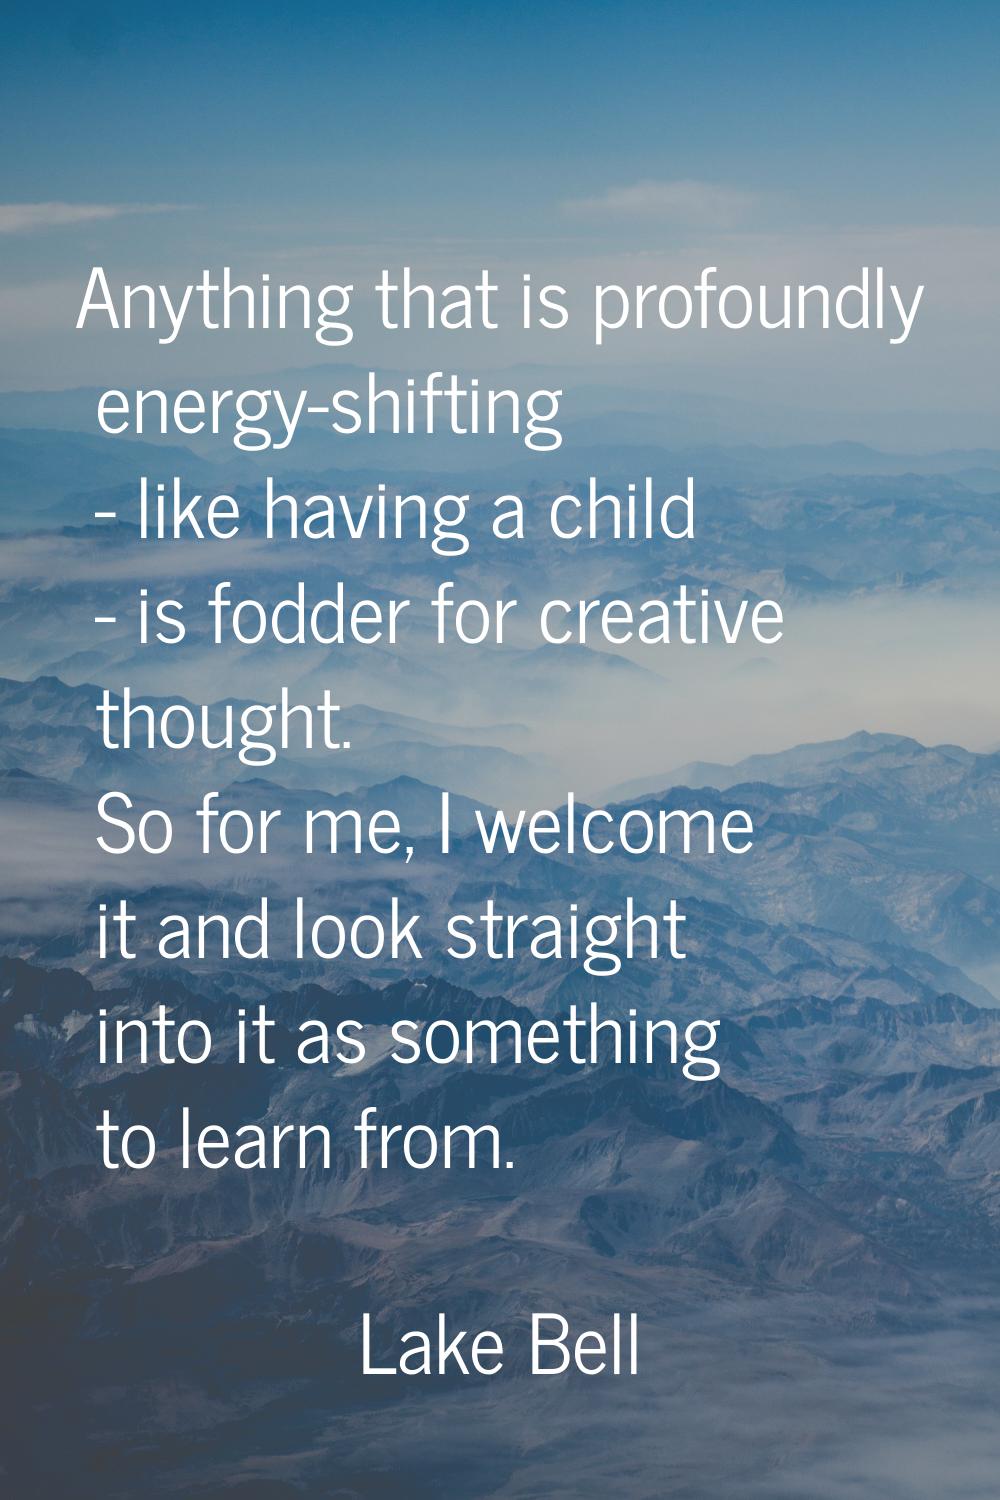 Anything that is profoundly energy-shifting - like having a child - is fodder for creative thought.